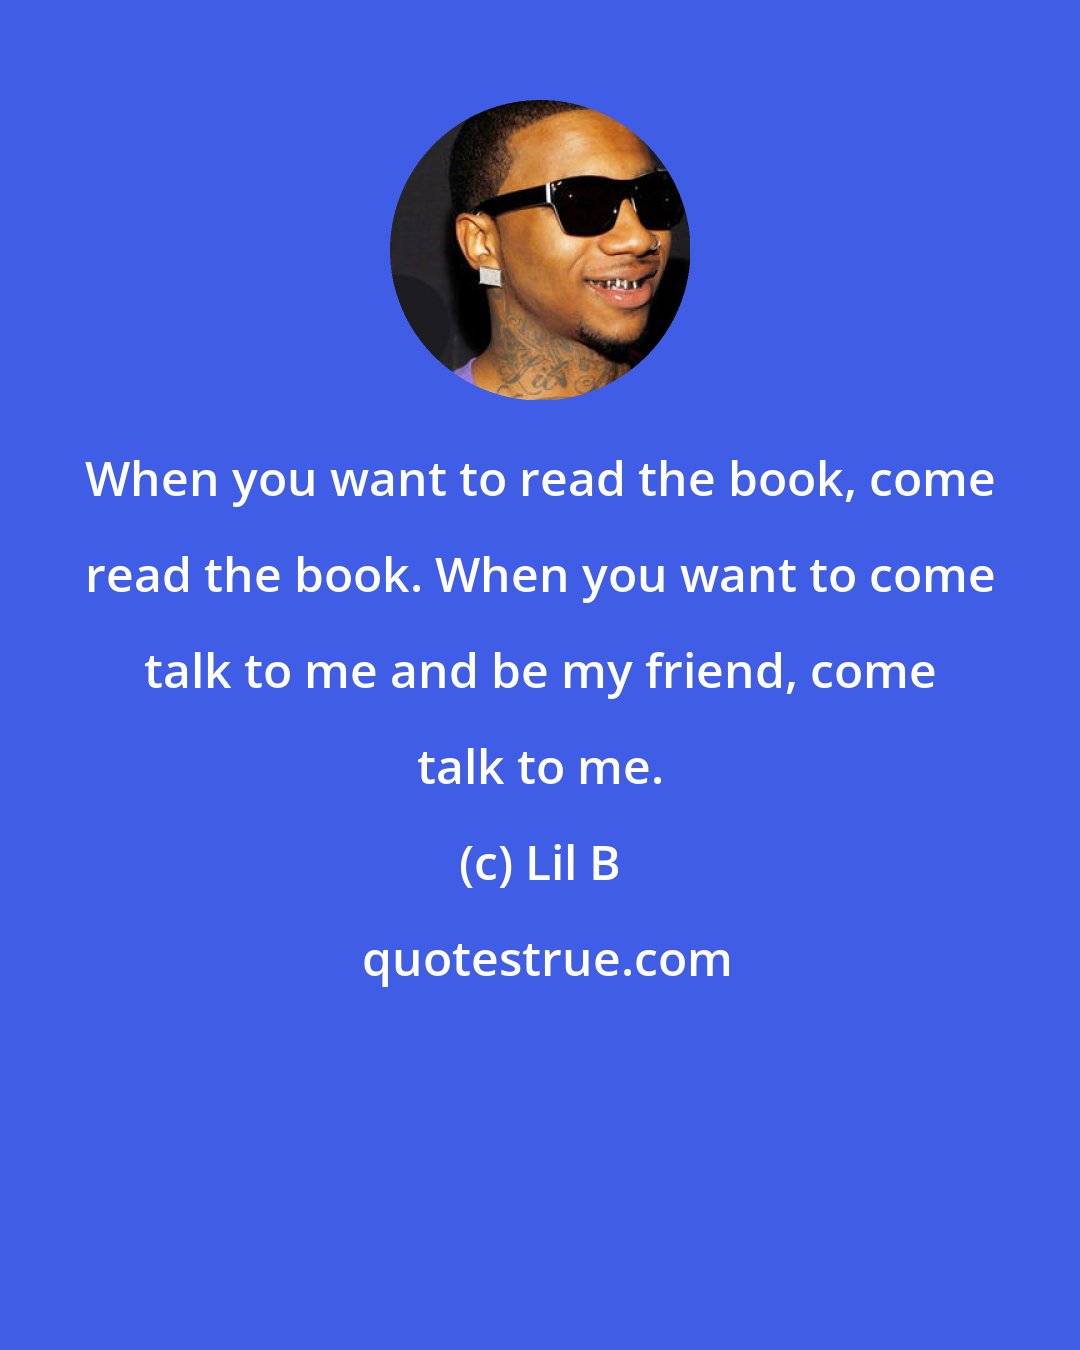 Lil B: When you want to read the book, come read the book. When you want to come talk to me and be my friend, come talk to me.